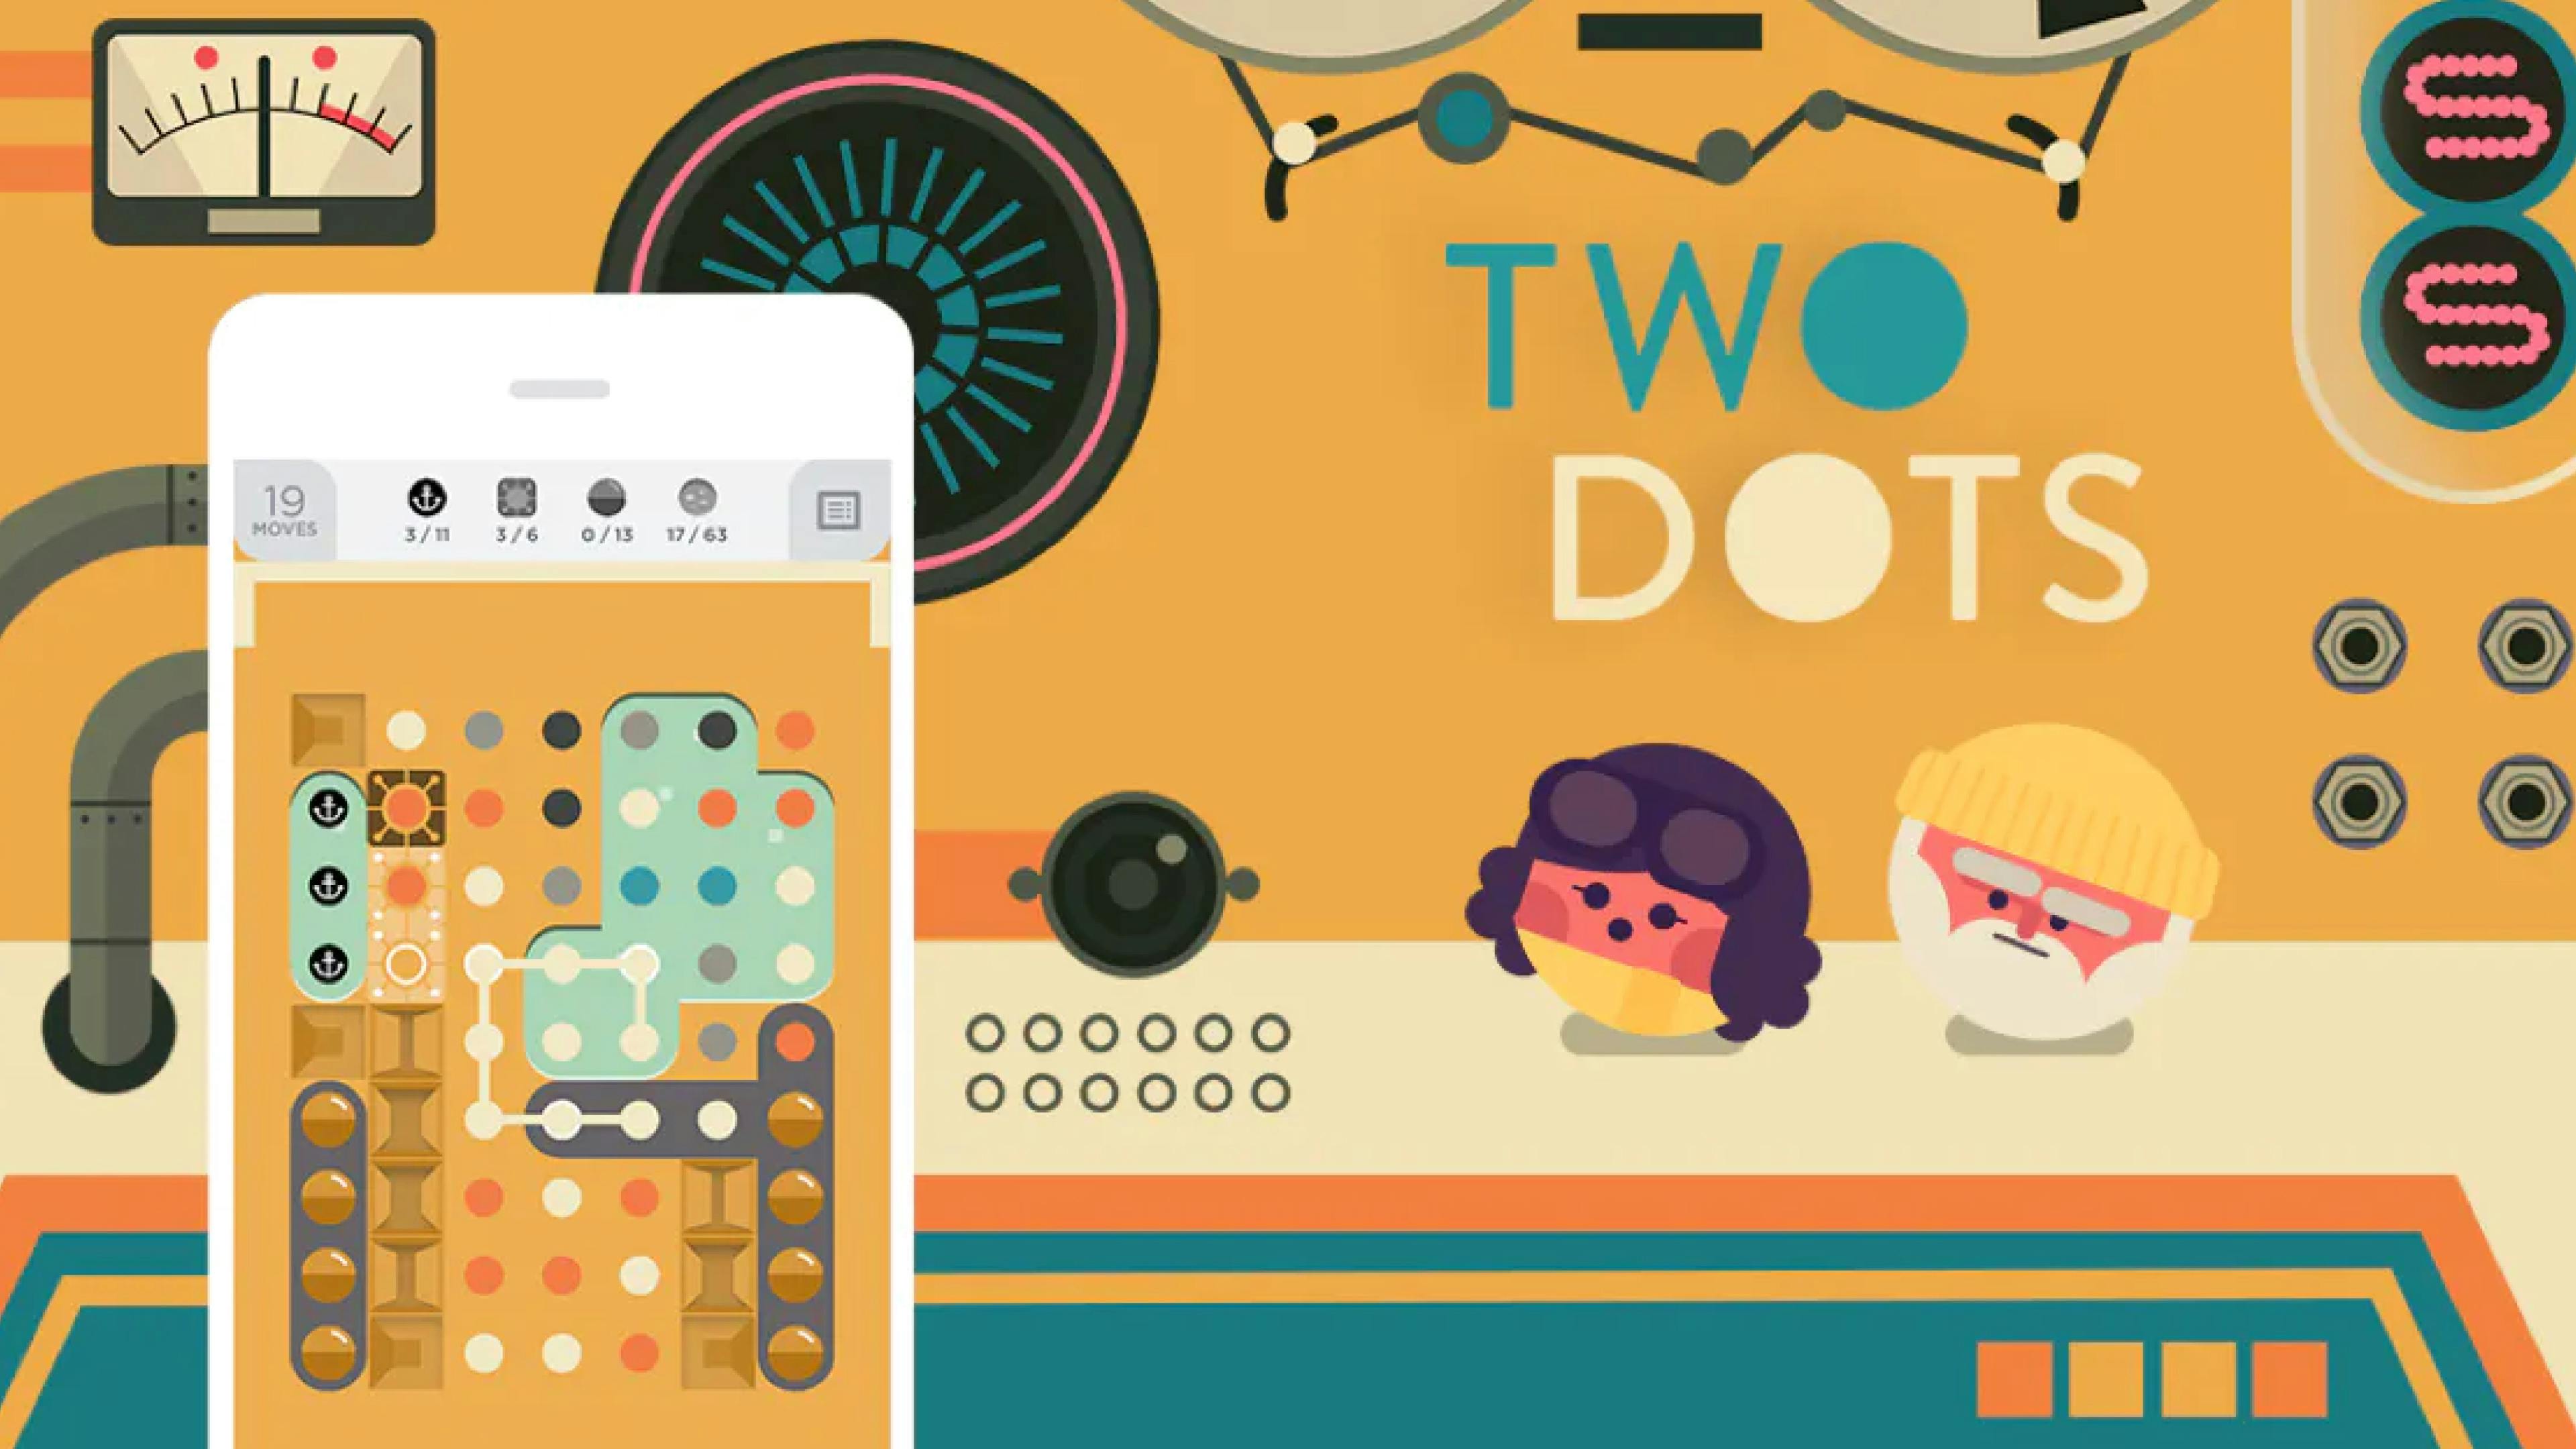 Two Dots game